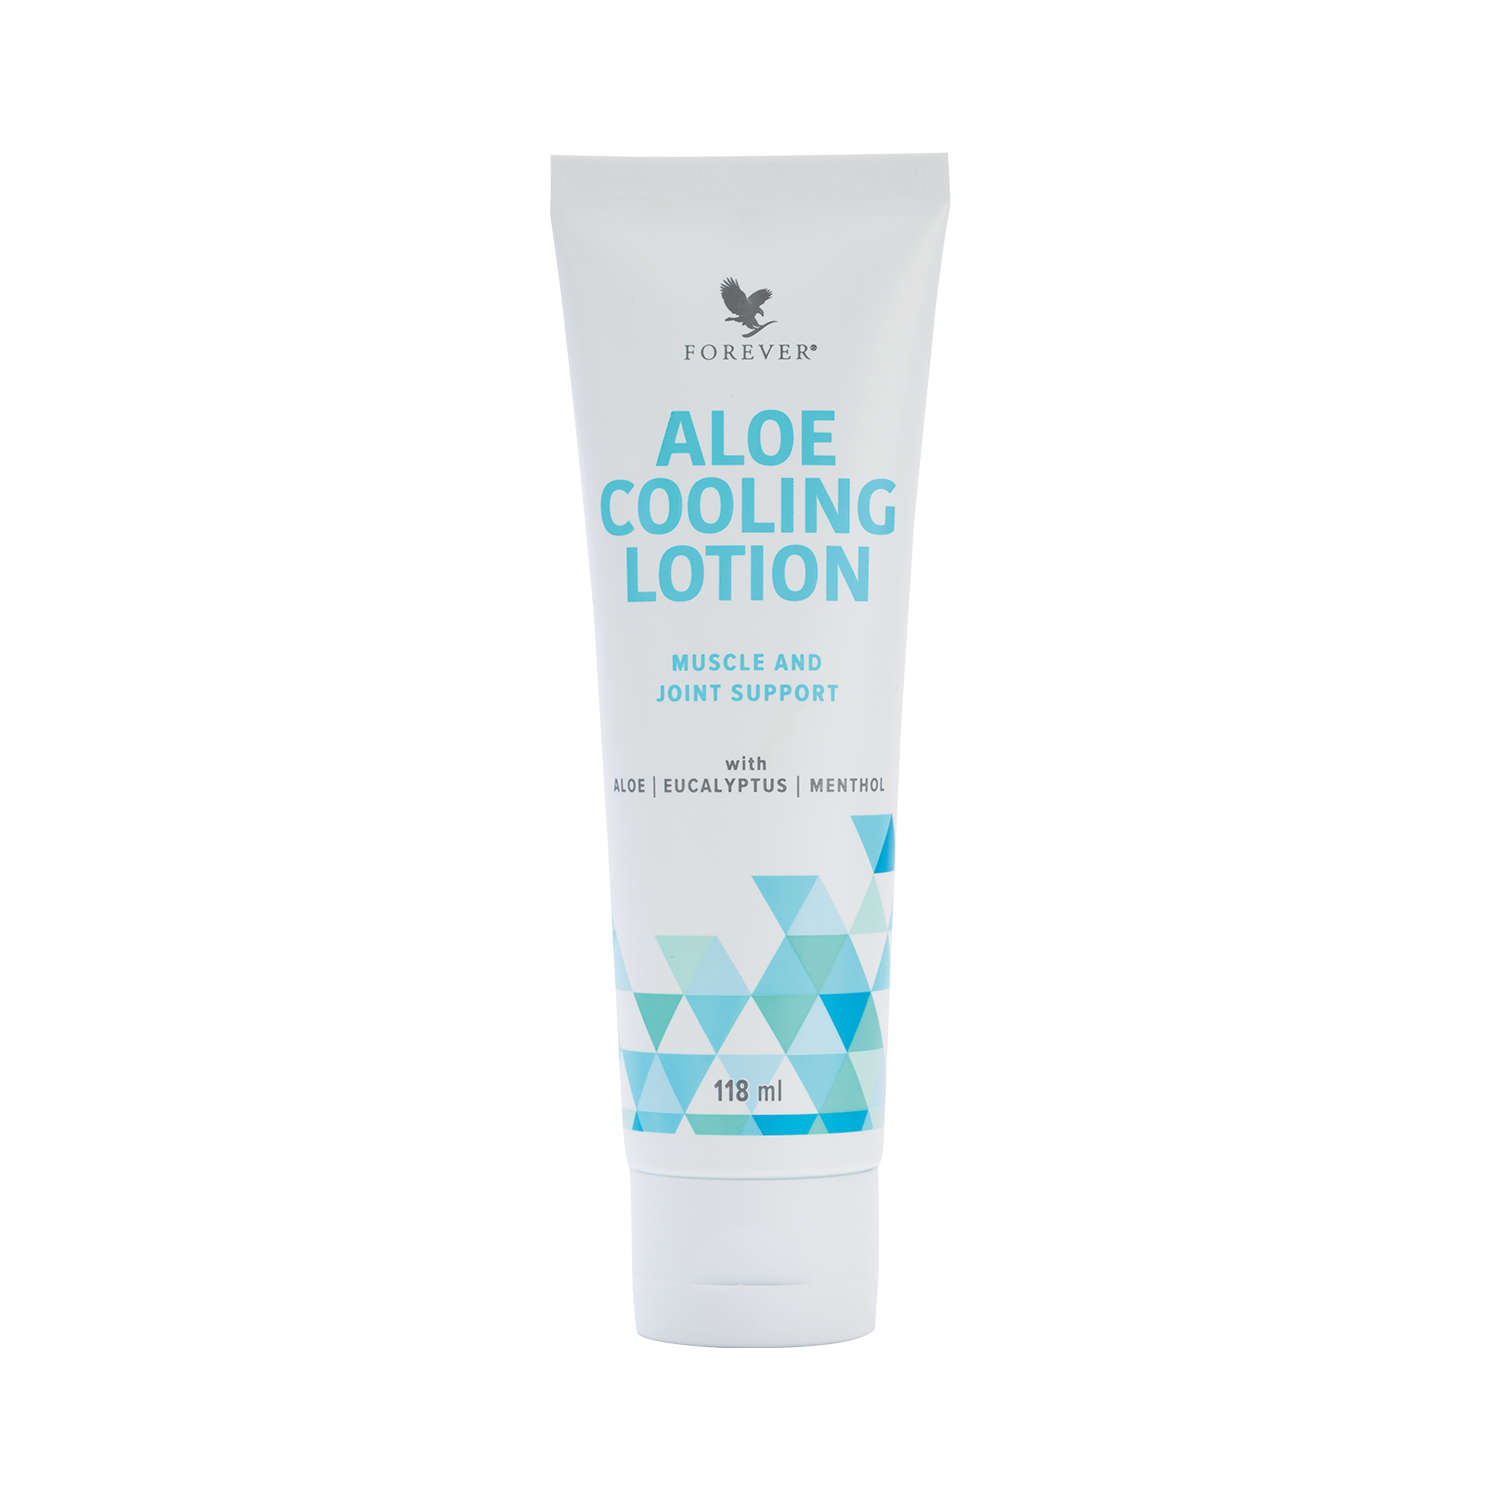 Refresh tired muscles and joints after a long day or challenging workout with&nbsp;<b>Aloe Cooling Lotion</b>. Our light, invigorating formula provides an instant cooling sensation, both revitalising hard-working muscles and promoting recovery.<br /><br /><br />